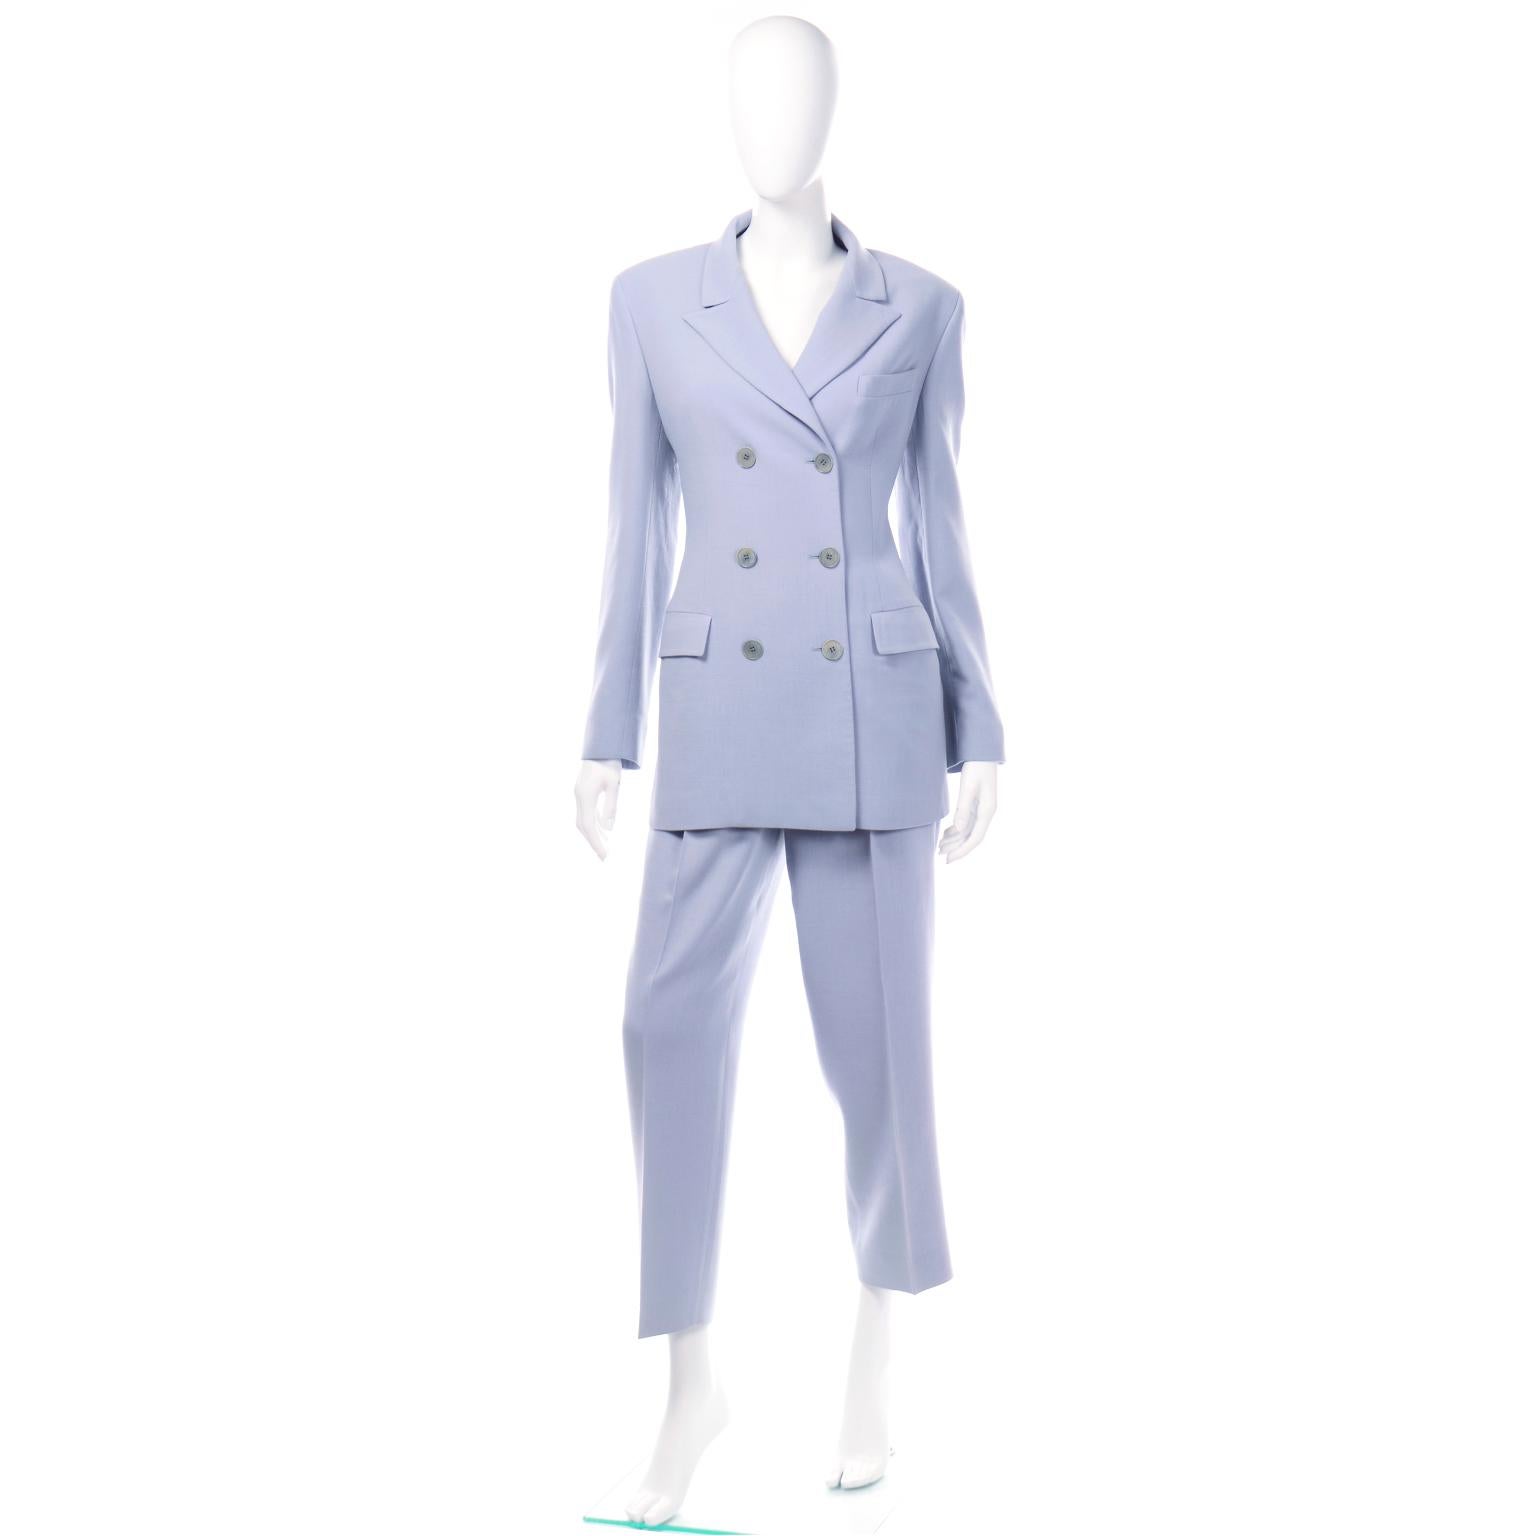 This monochromatic Calvin Klein Collection pant suit is in a beautiful periwinkle blue summer weight wool. This suit is so modern and can be worn as a suit or it can be broken up to give you two great separates to wear with other pieces. The double